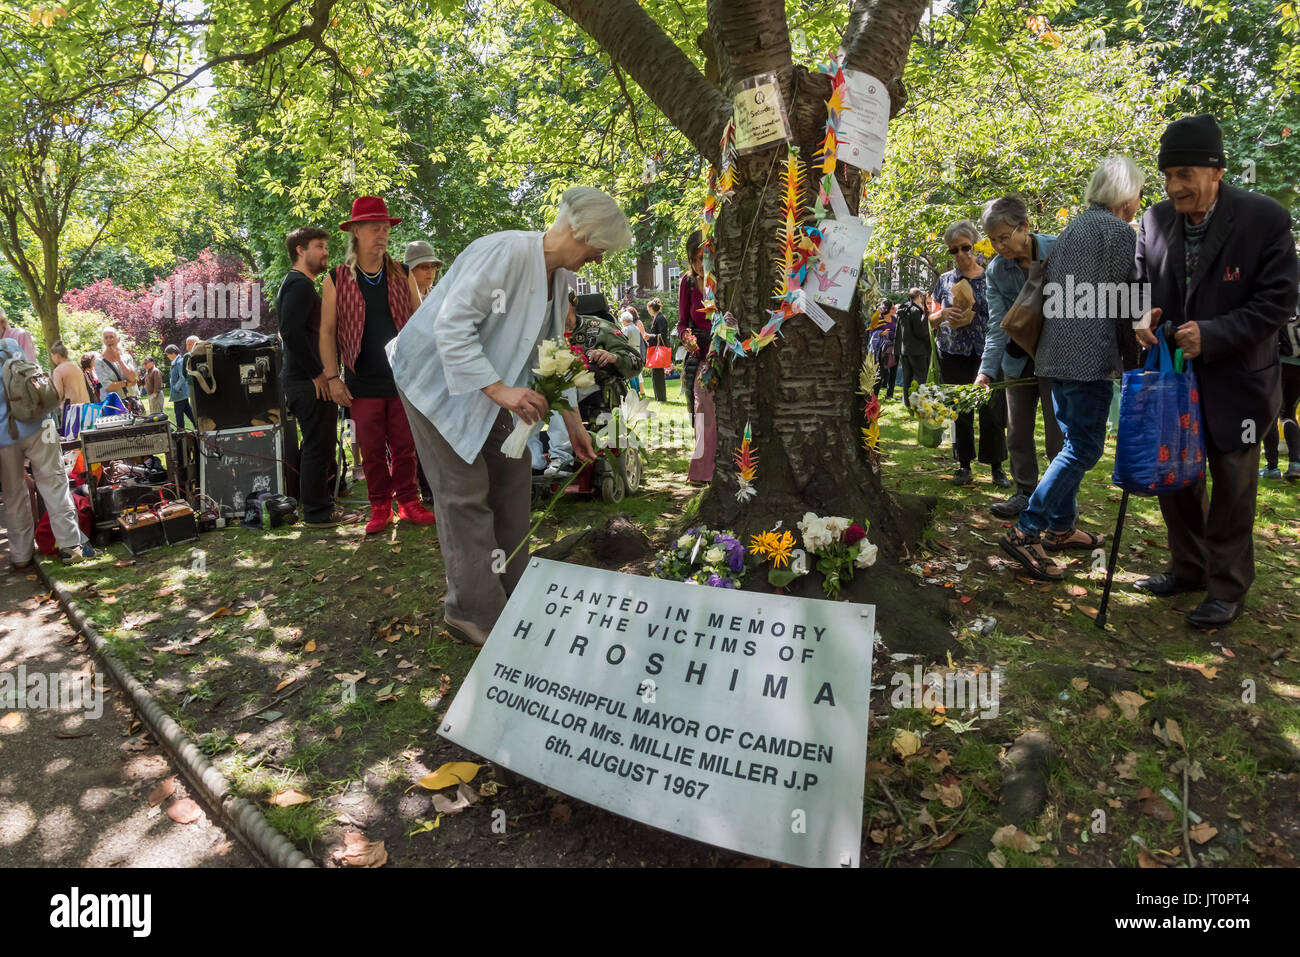 London, UK. 6th Aug, 2017. London, UK. 6th August 2017.Peole lay flowers at the Hiroshima Cherry Tree at the London CND ceremony in memory of the victims, past and present on the 72nd anniversary of the dropping of the atomic bomb on Hiroshima and the second atomic bomb dropped on Nagasaki three days later. Peter Marshall ImagesLive Credit: Peter Marshall/ImagesLive/ZUMA Wire/Alamy Live News Stock Photo